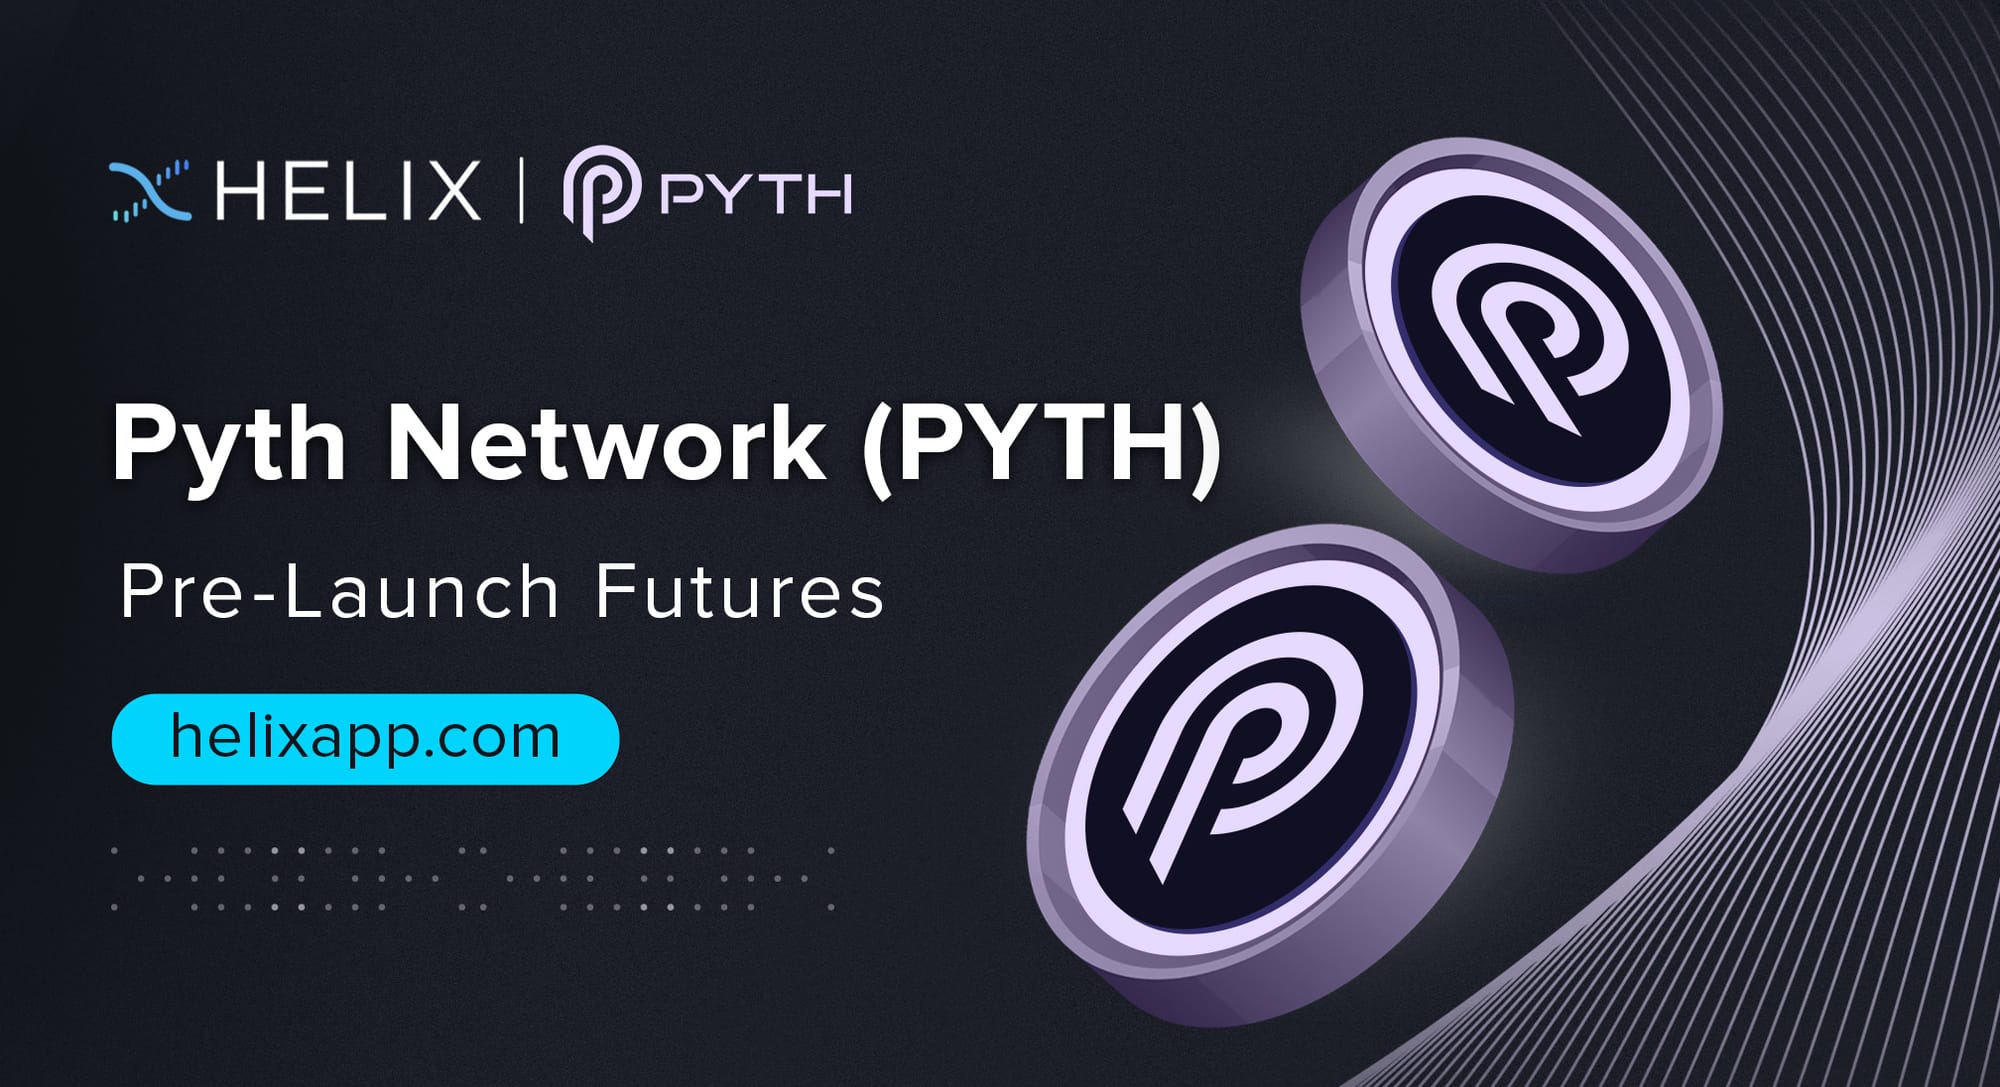 Decentralized Pyth Network (PYTH) Pre-Launch Futures Listing on Helix